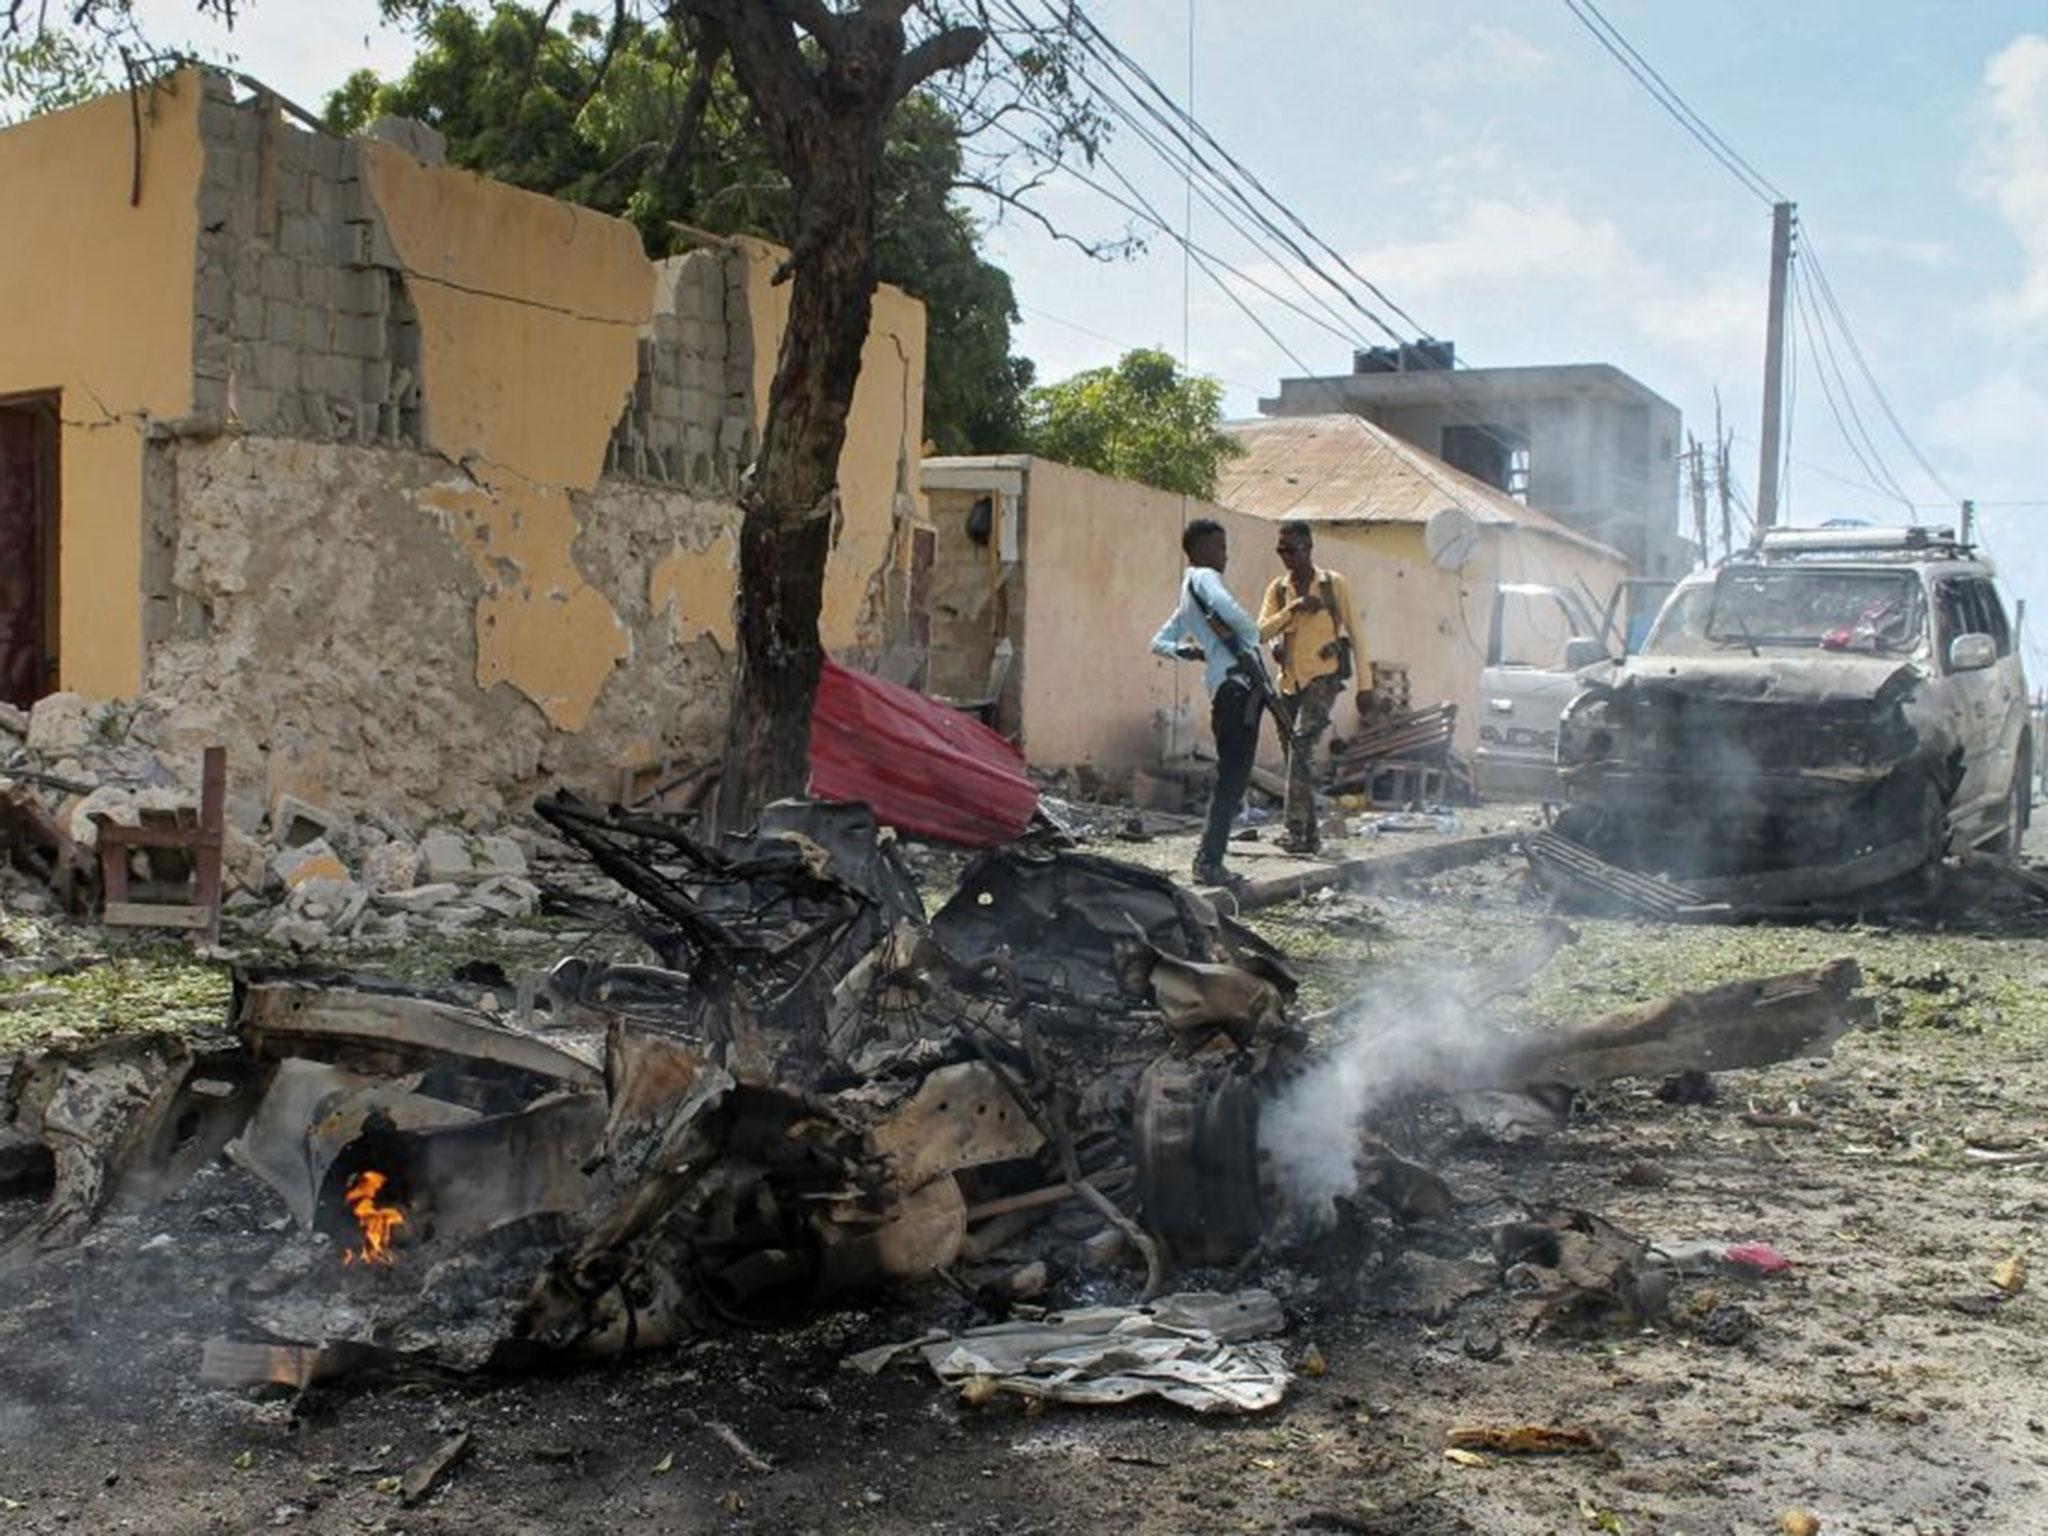 Al Shabaab has carried out a series of deadly attacks in Somalia to try to topple the Western-backed government